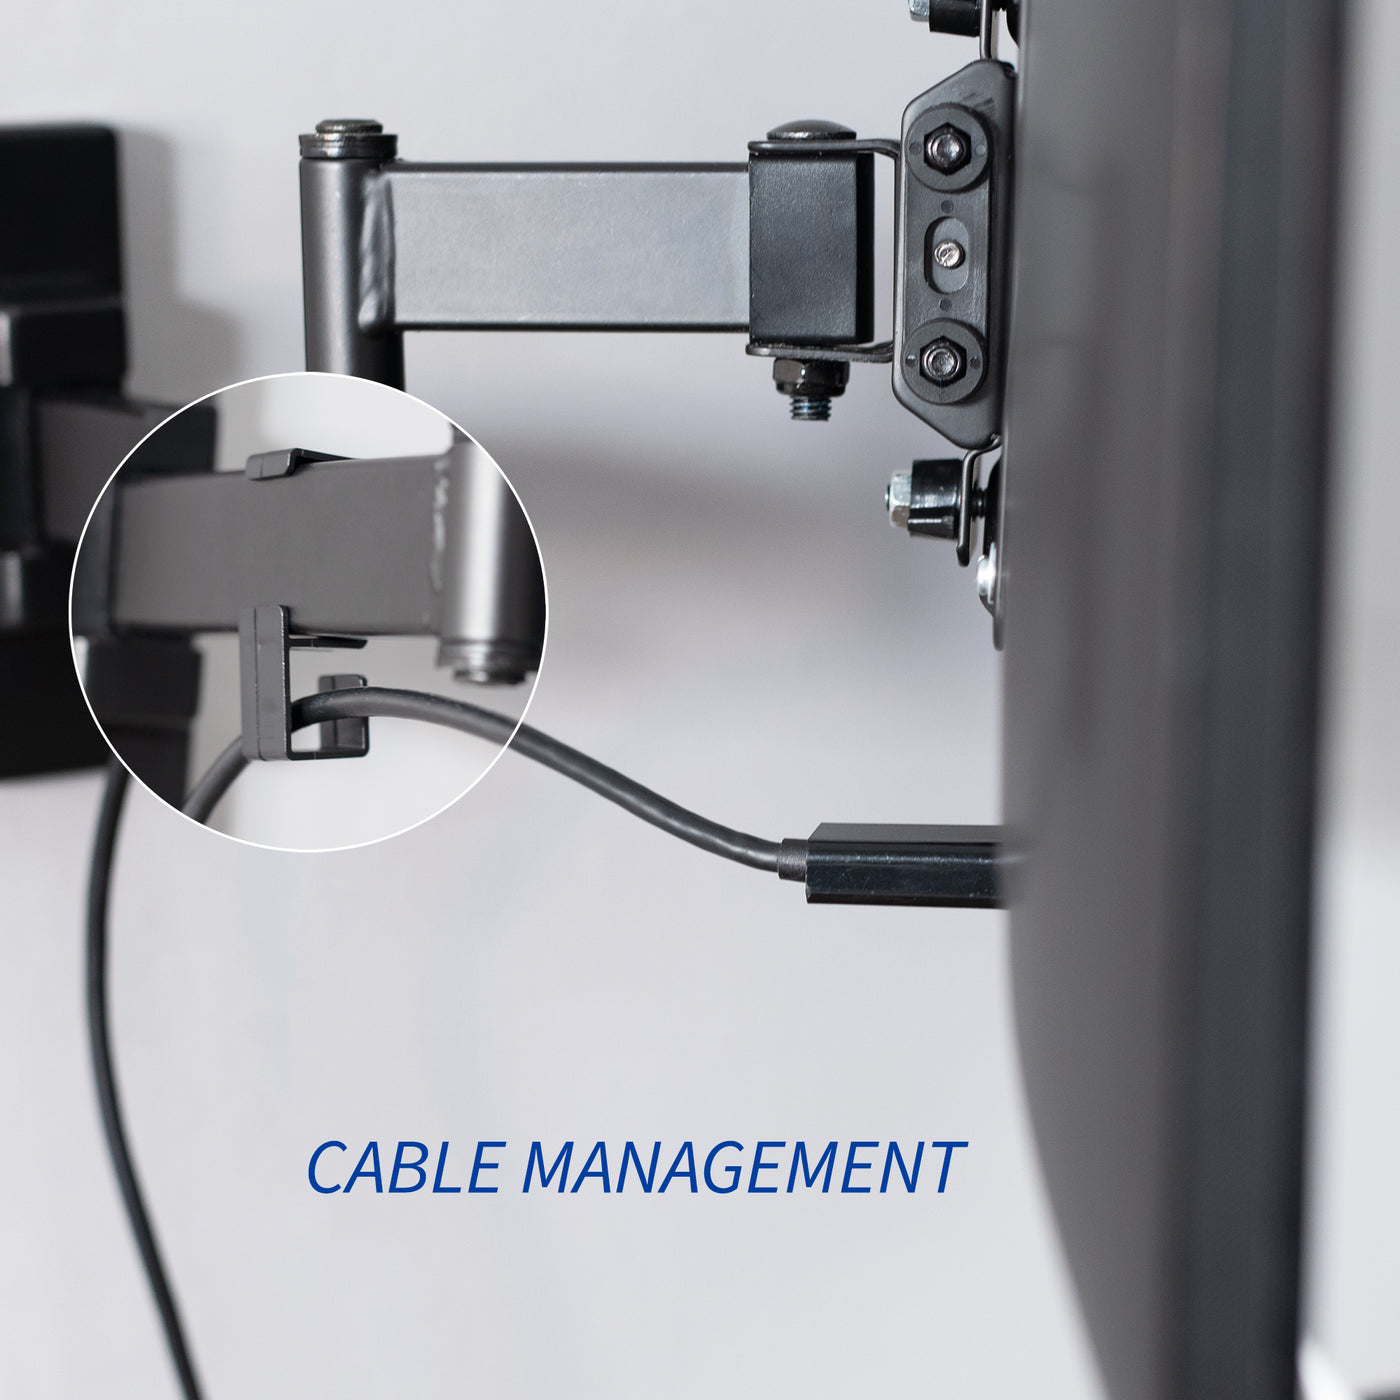 Sturdy adjustable single monitor ergonomic wall mount for office workstation with integrated cable management.